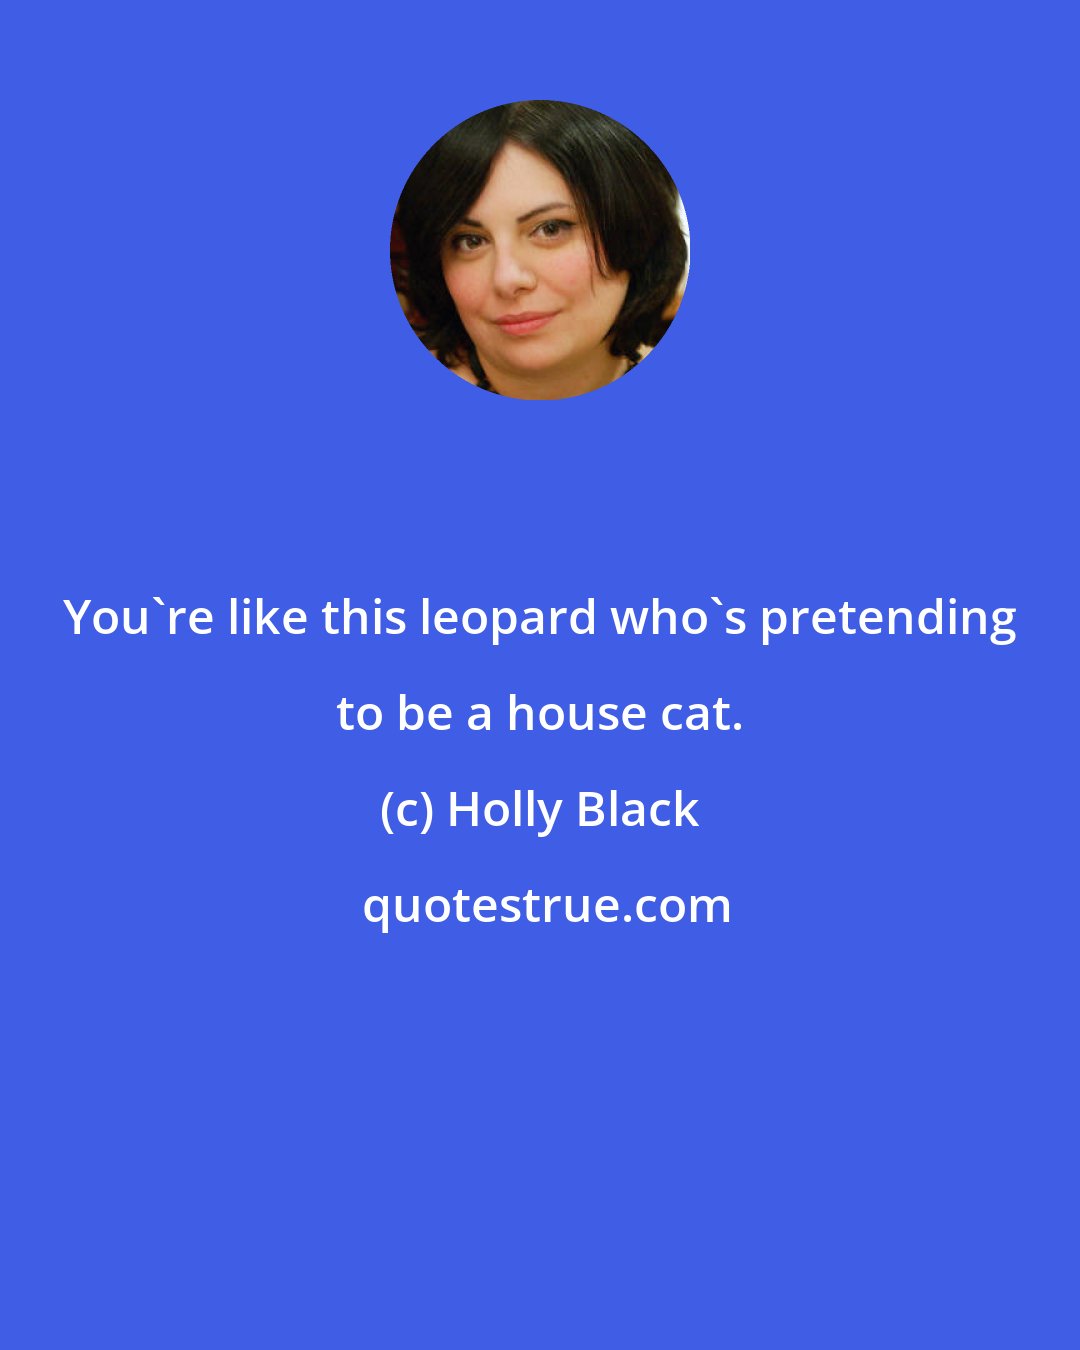 Holly Black: You're like this leopard who's pretending to be a house cat.